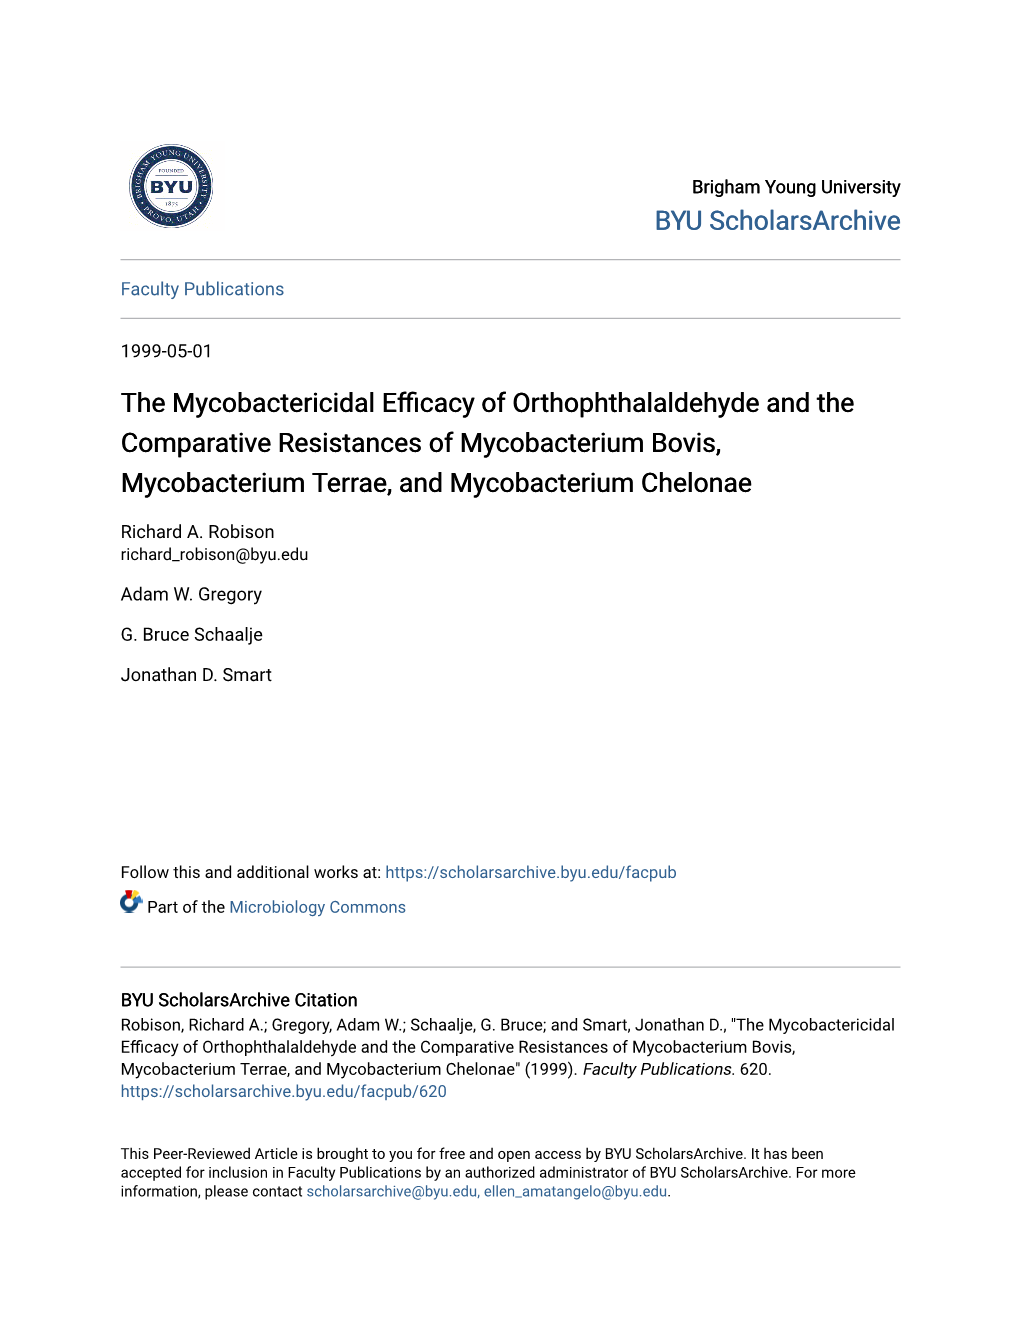 The Mycobactericidal Efficacy of Orthophthalaldehyde and the Comparative Resistances of Mycobacterium Bovis, Mycobacterium Terrae, and Mycobacterium Chelonae